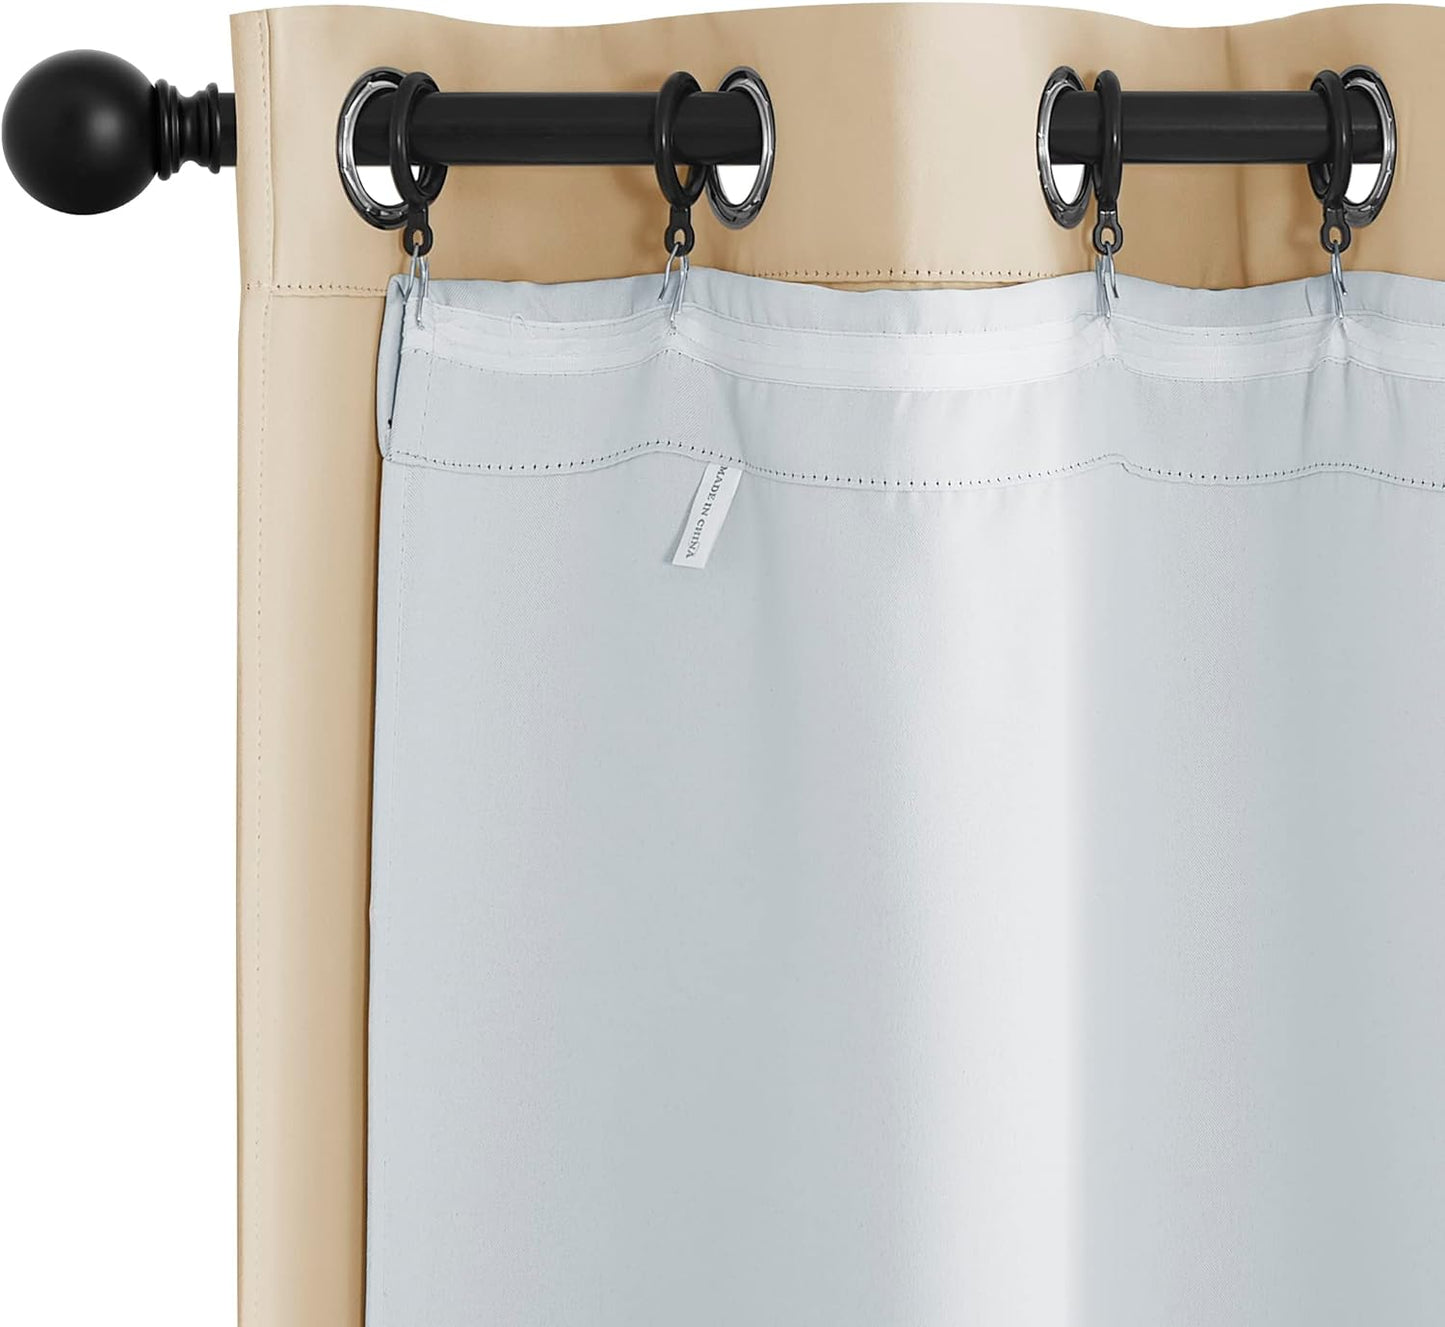 NICETOWN Thermal Insulated Blackout Liner - Blackout Curtain Liner for 63 Inches Drapes, Light Blocking Curtain Liners, Block Out Curtain Liners, Hooks Included, 2 Panels, 45W by 58L Inches  NICETOWN Greyish White 2 X W27" X L68" 